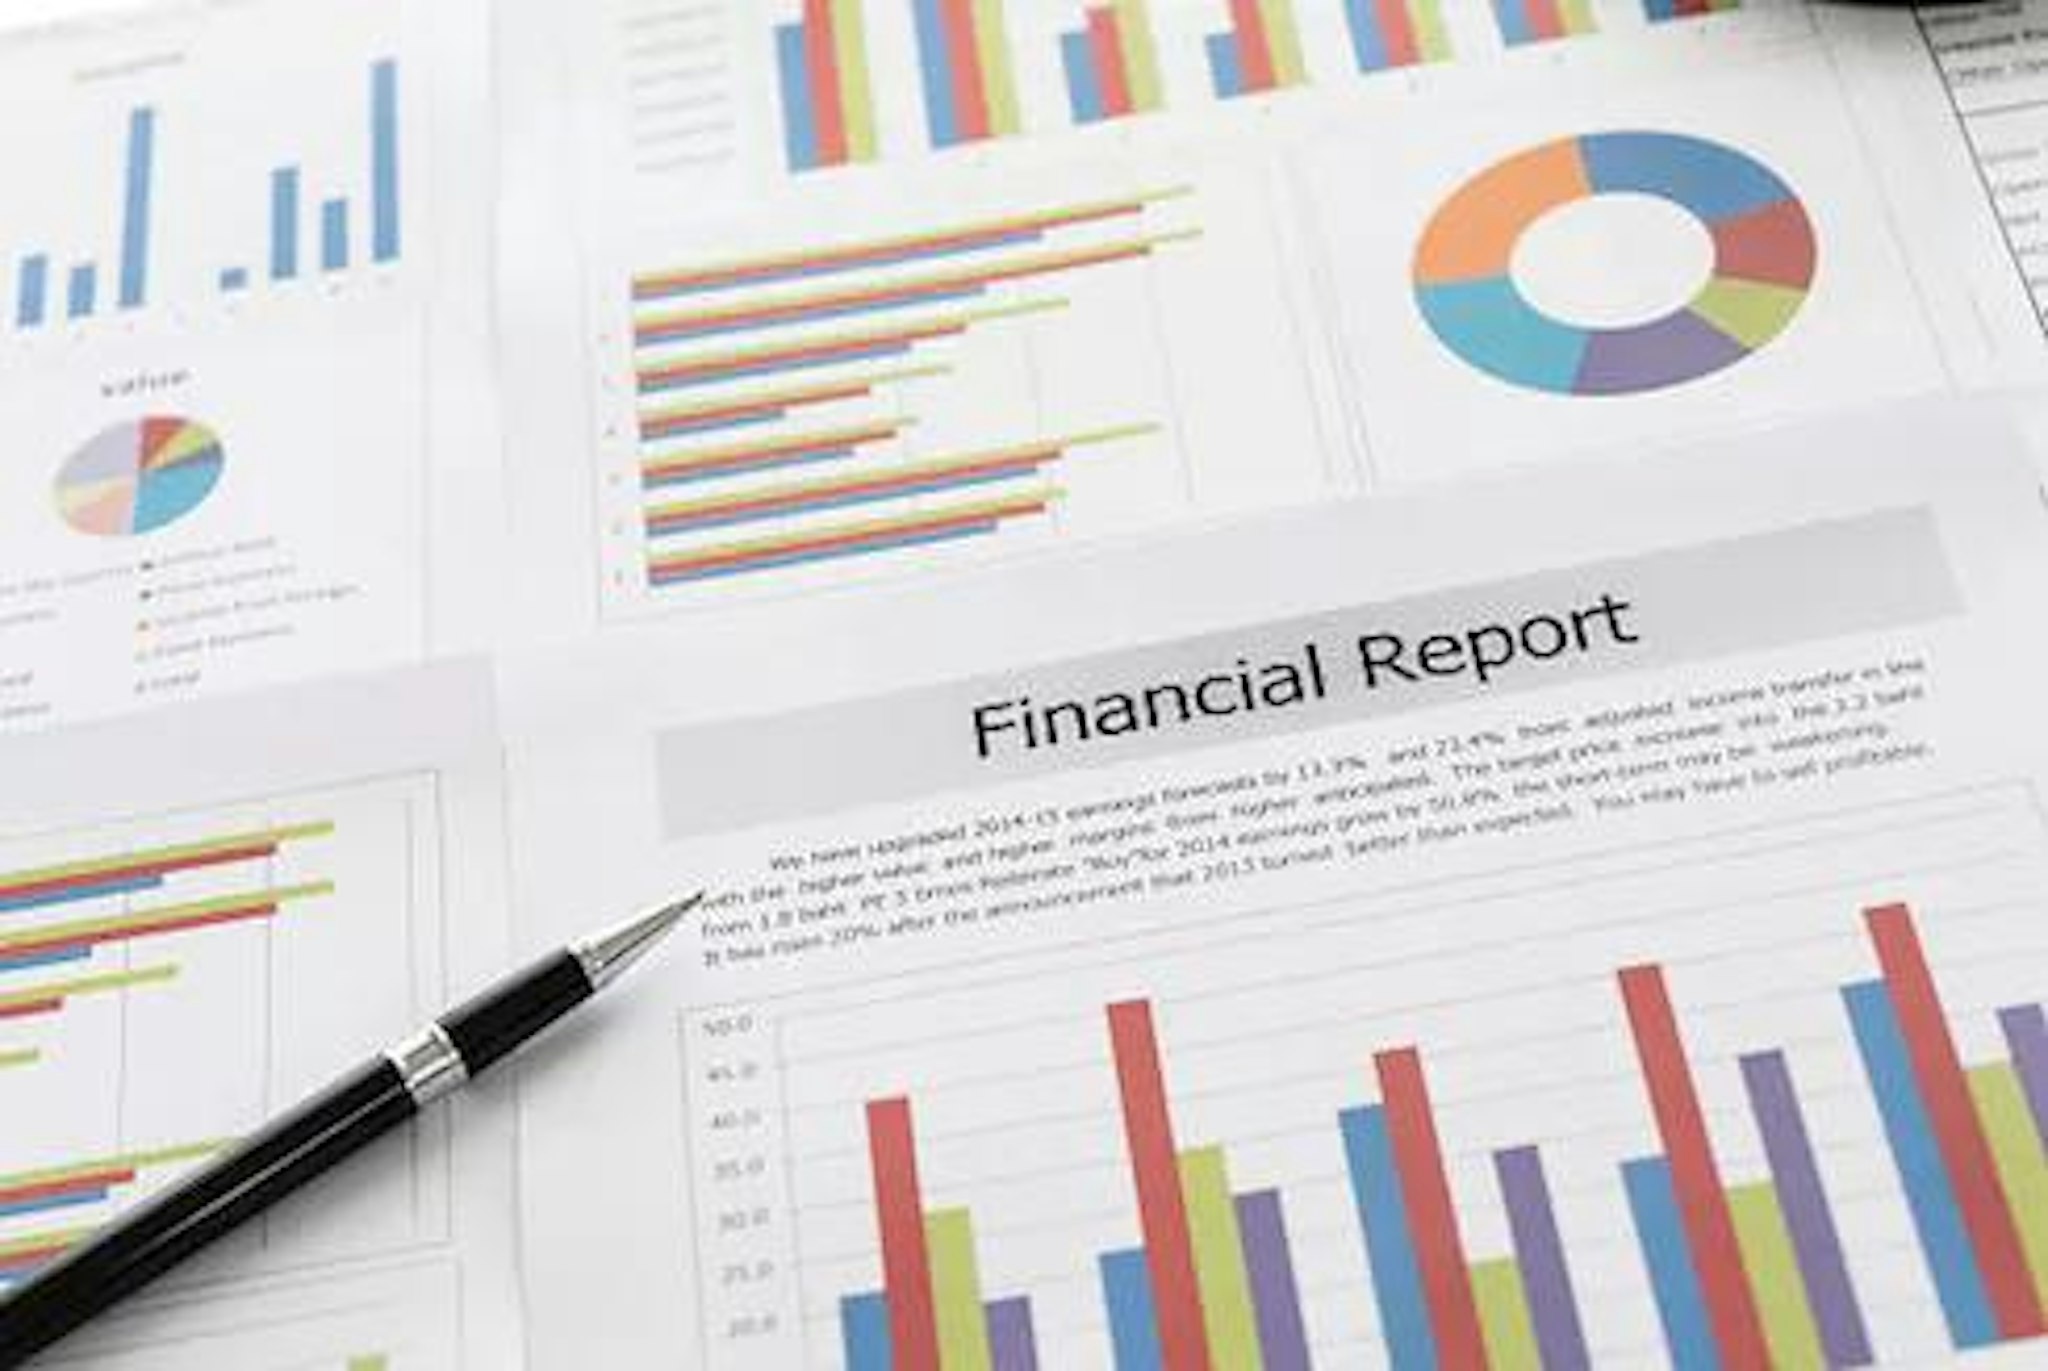 Financial reports displaying charts and the words "financial report" written on it, demonstrating the annual report.